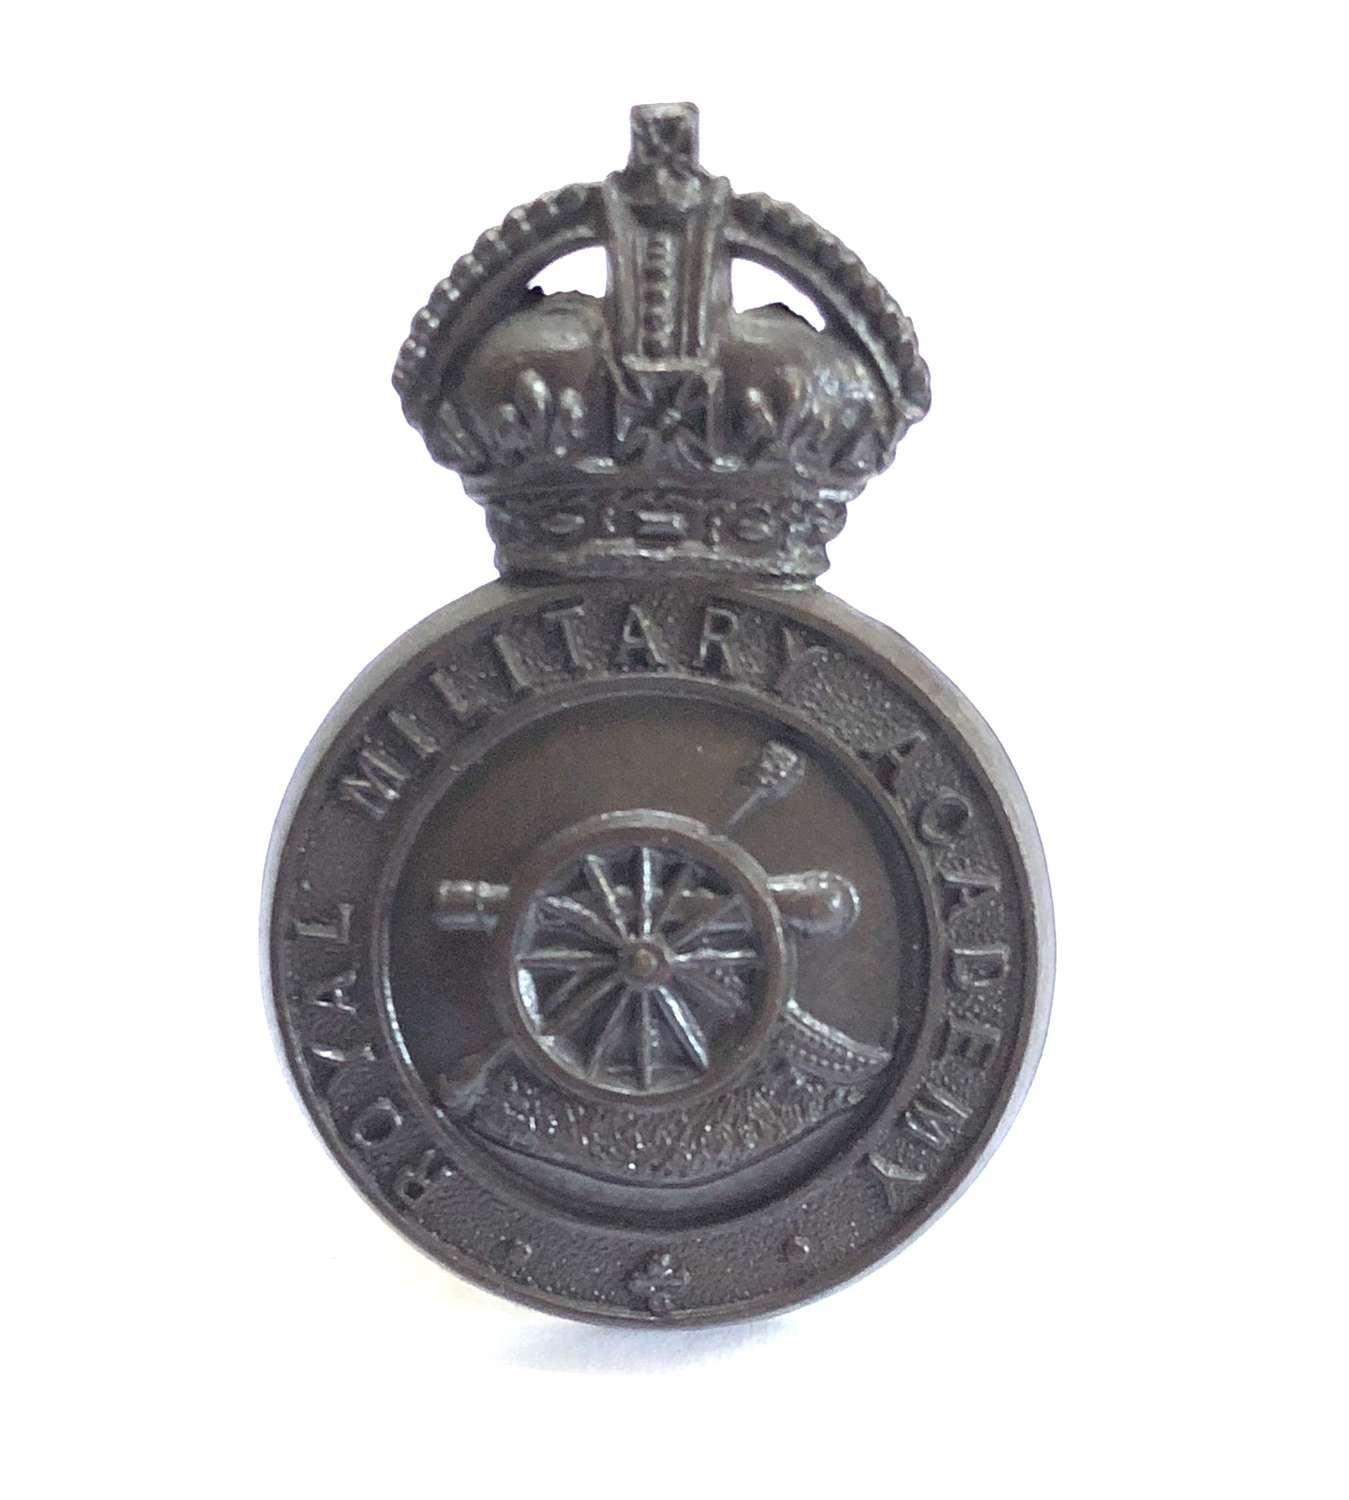 Royal Military Academy, Woolwich post 1902 OSD cap badge